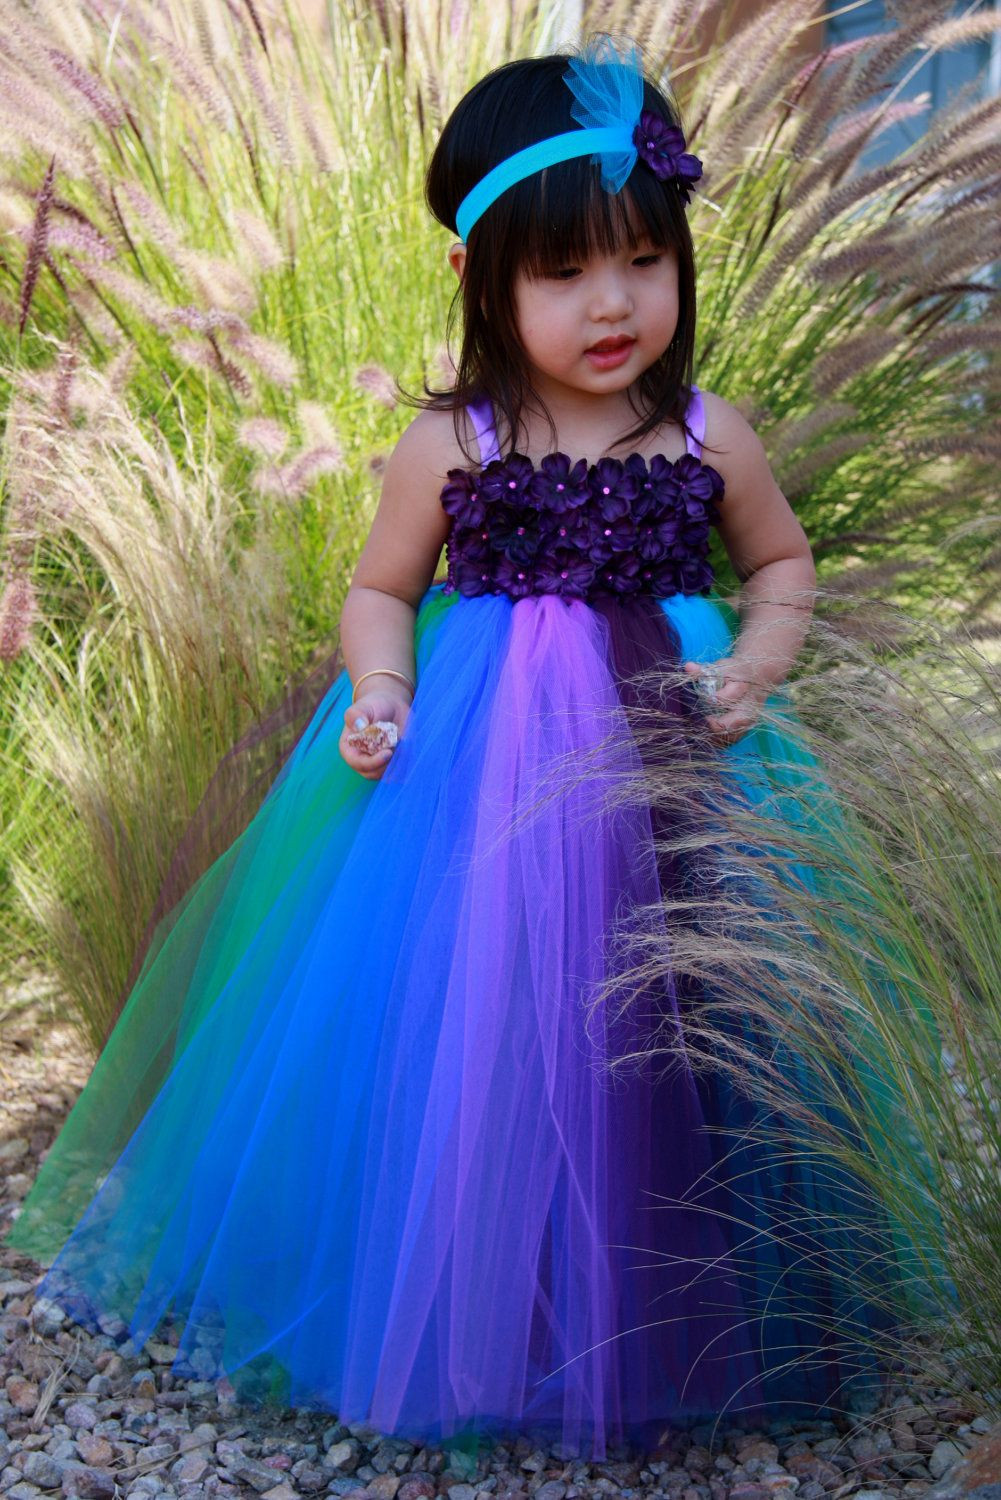 DIY Tutu Dress For Toddler
 Peacock Inspired Tutu Dress Series IV by giselleboutique